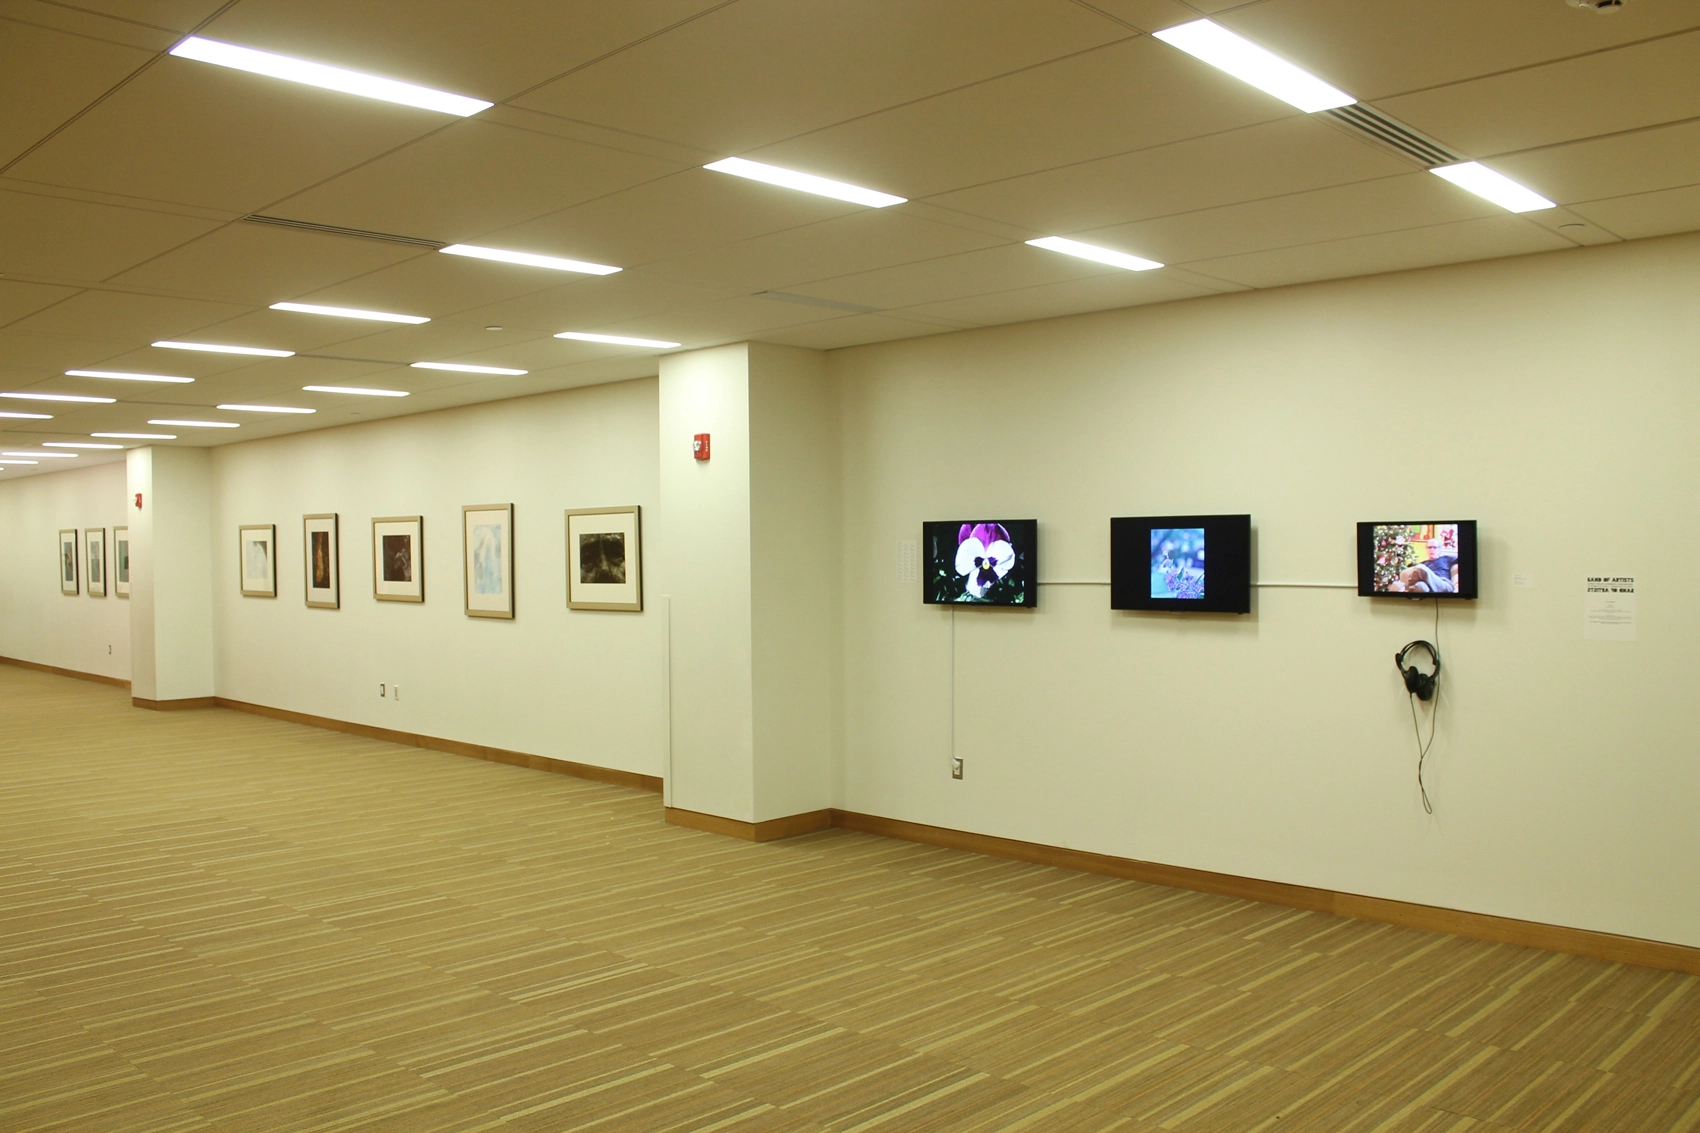 Installation view, "Band of Artists: Spectrum Order Disorder," 2014, Commons Art Gallery